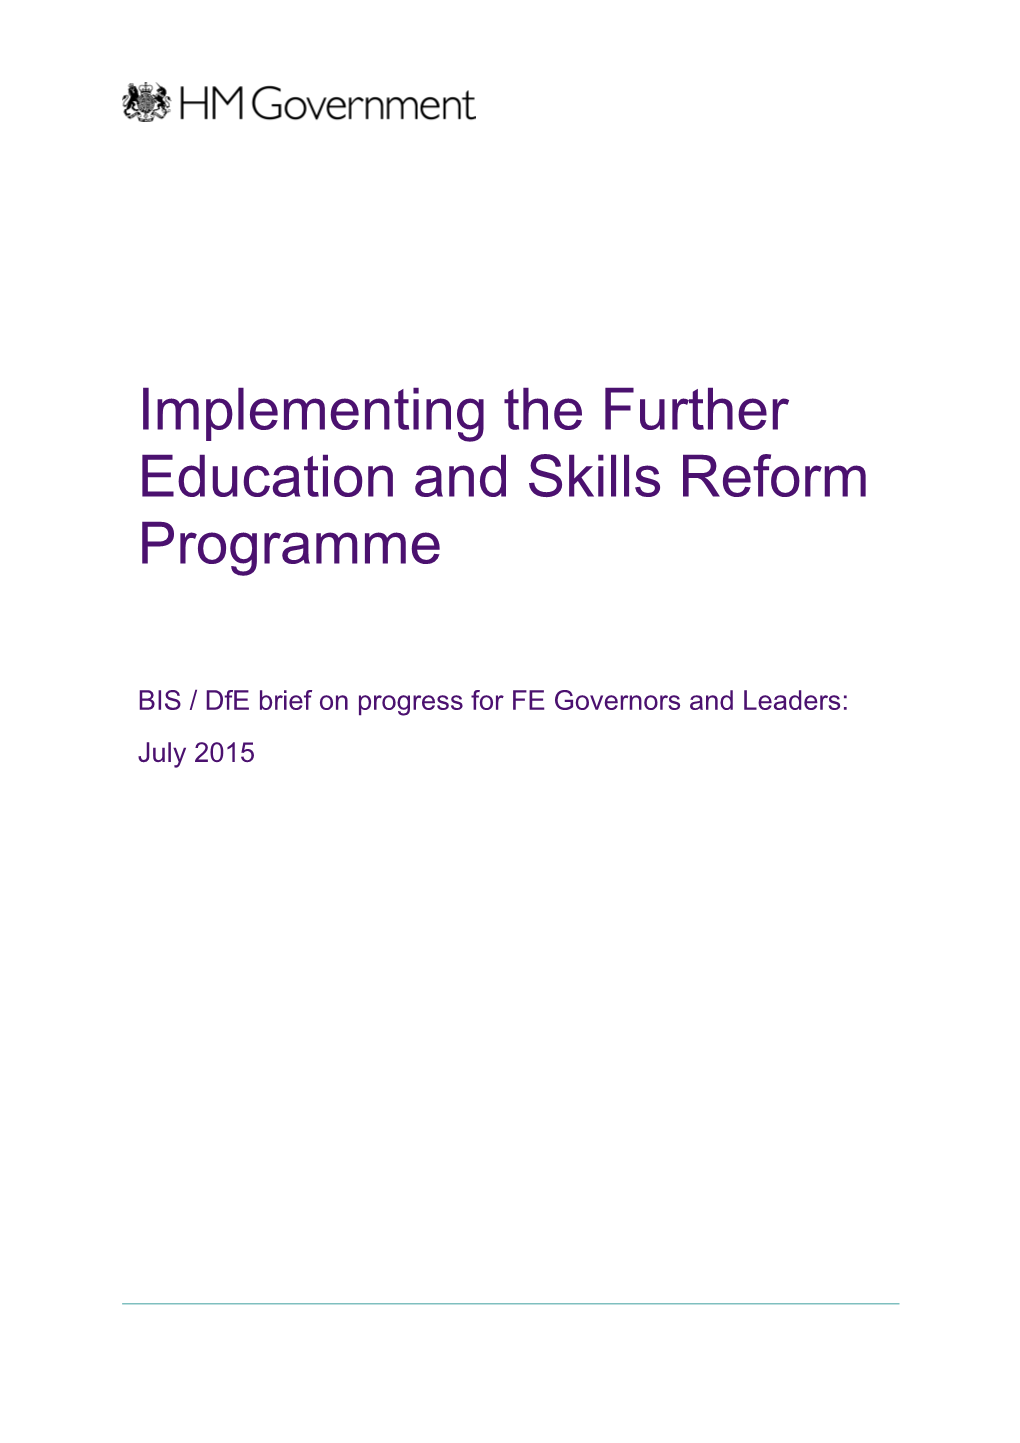 Implementing Rigour and Responsiveness: BIS / Dfe Brief on Progress for FE Governors and Leaders